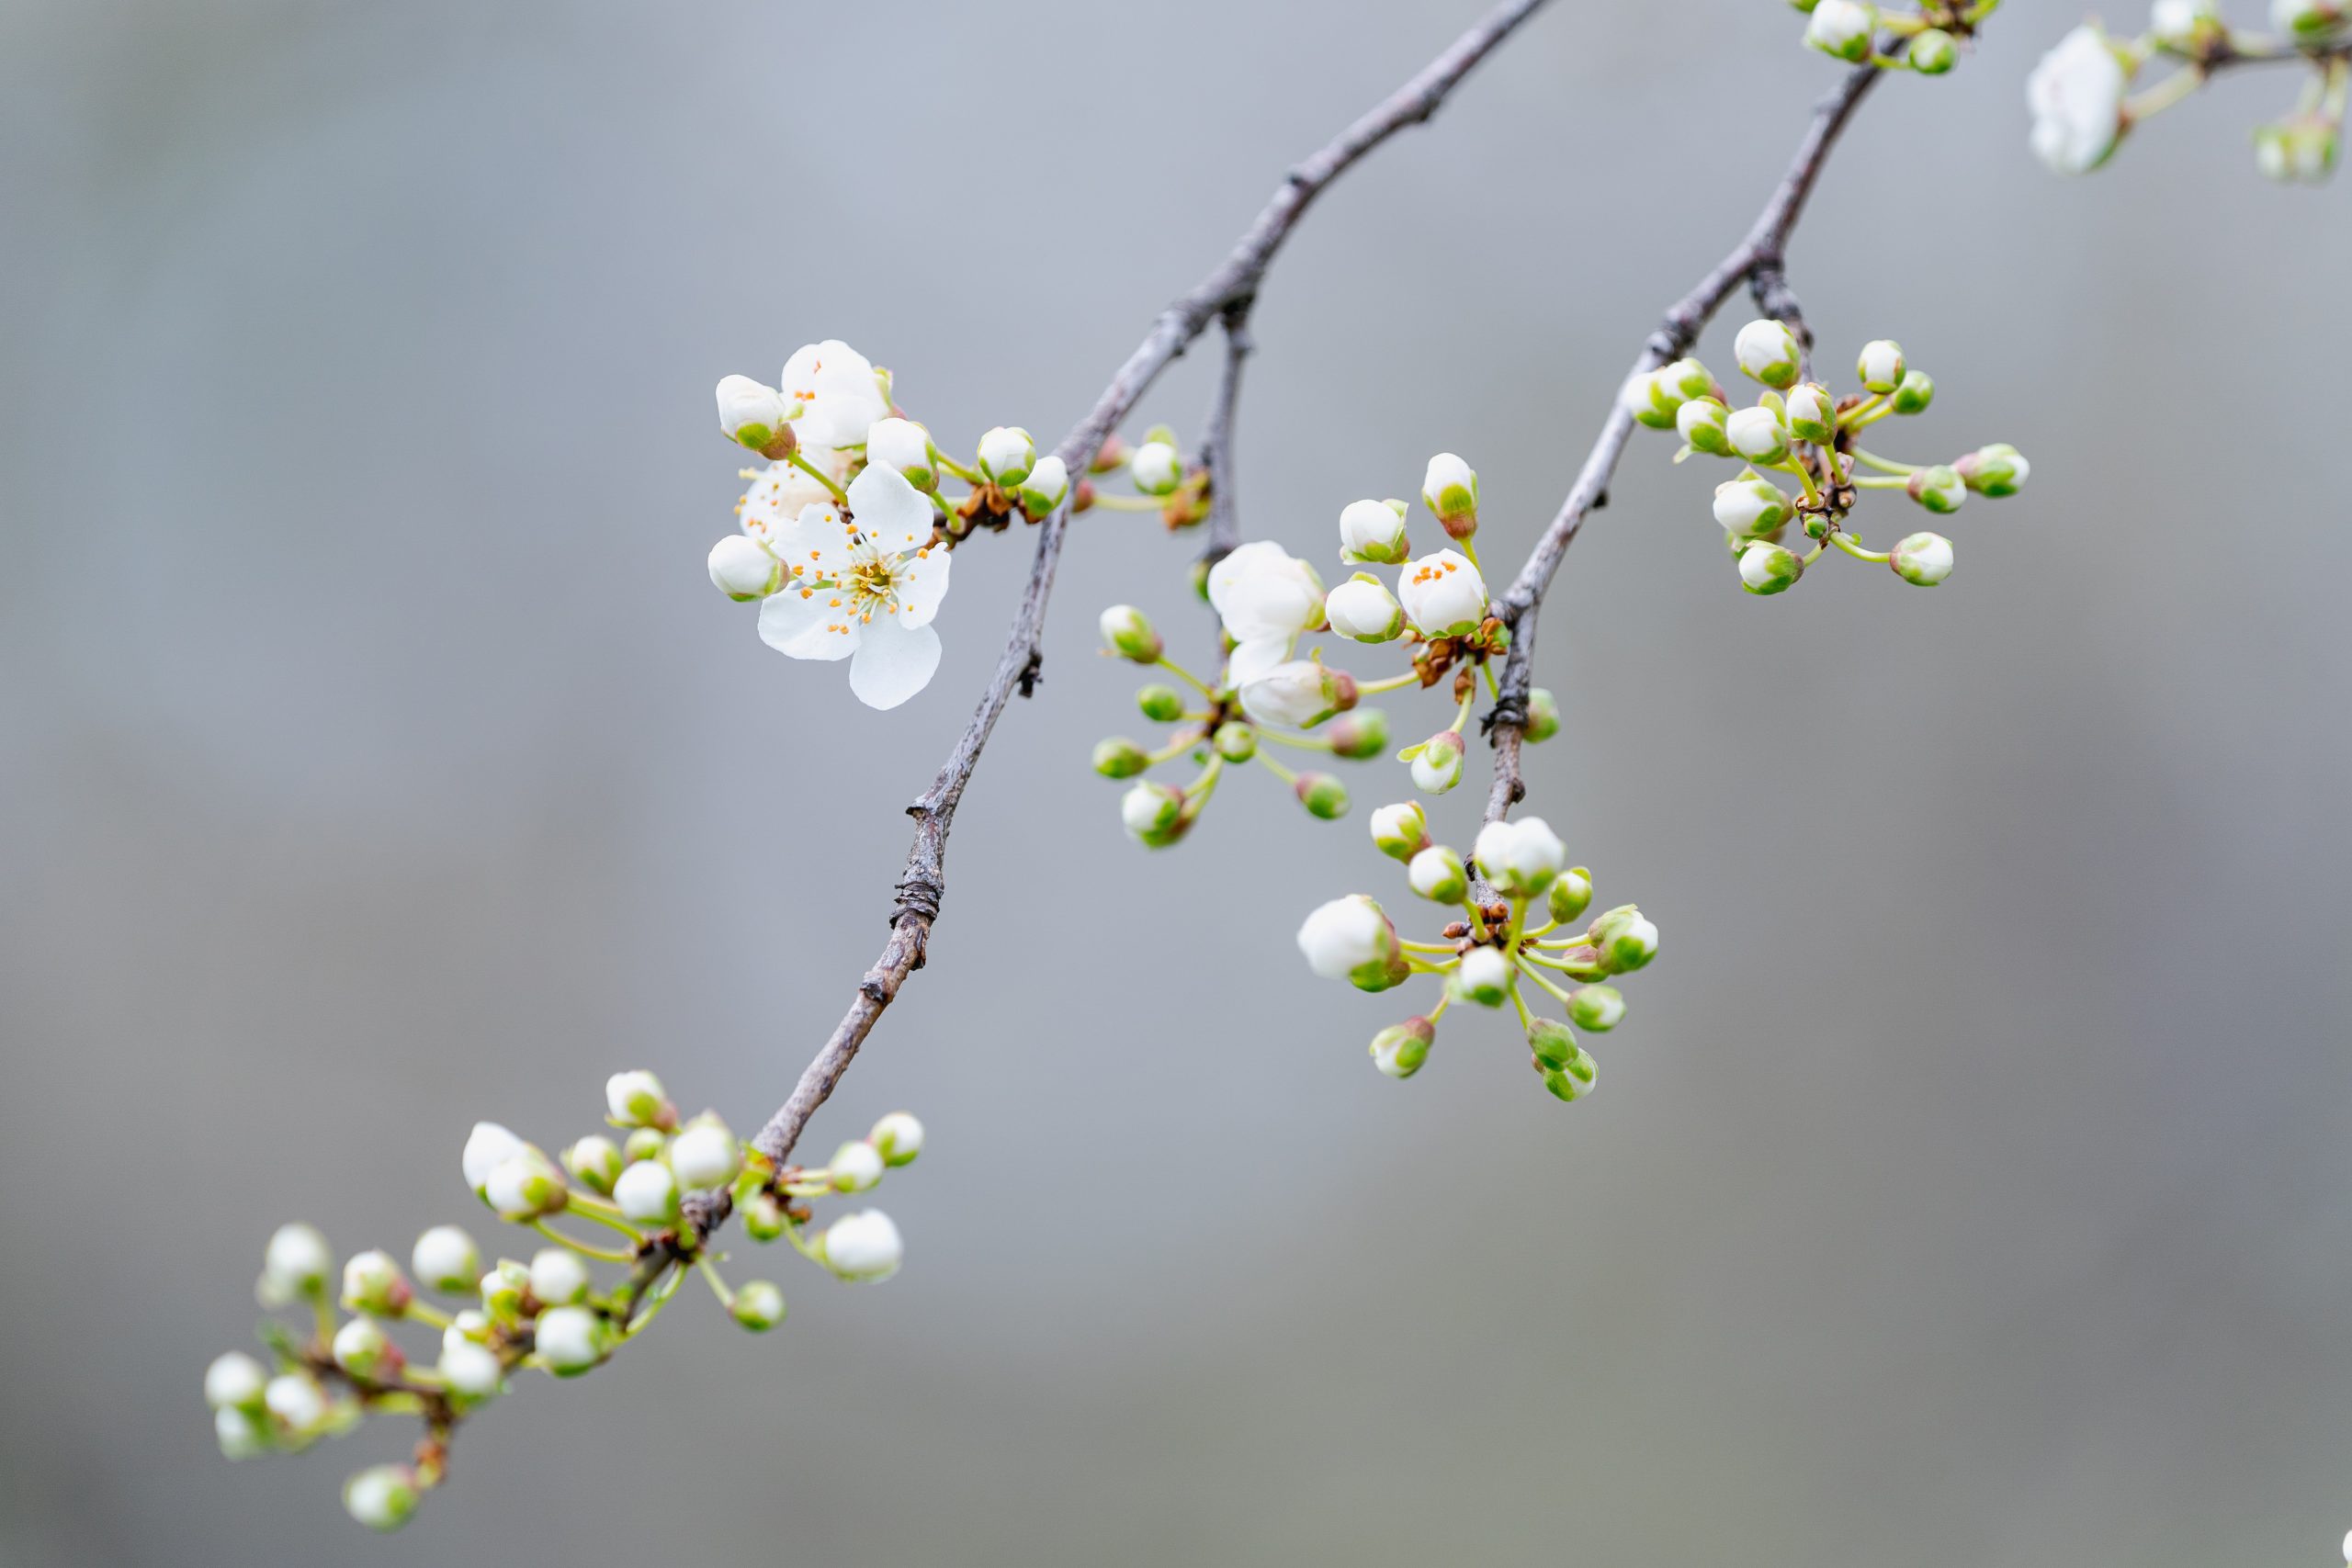 Dangling white flowers and green buds hang from the very tip of a tree branch